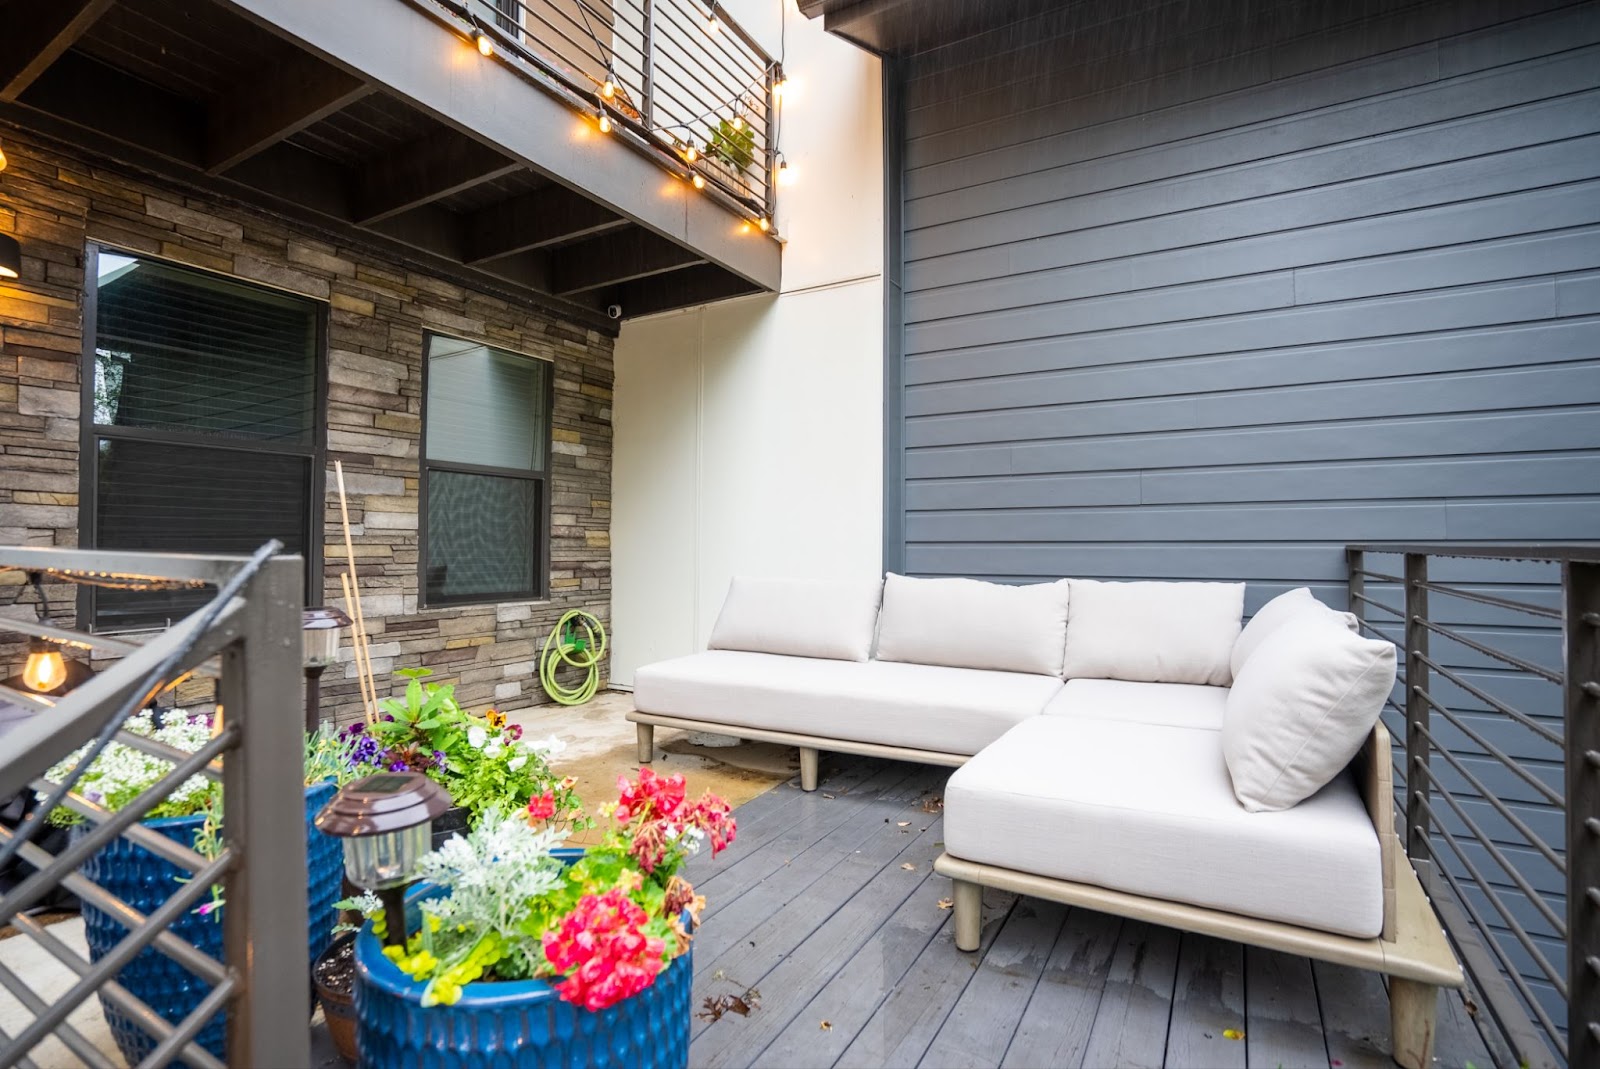 Relax on the back deck of this Kindred members home after a day of exploring Austin